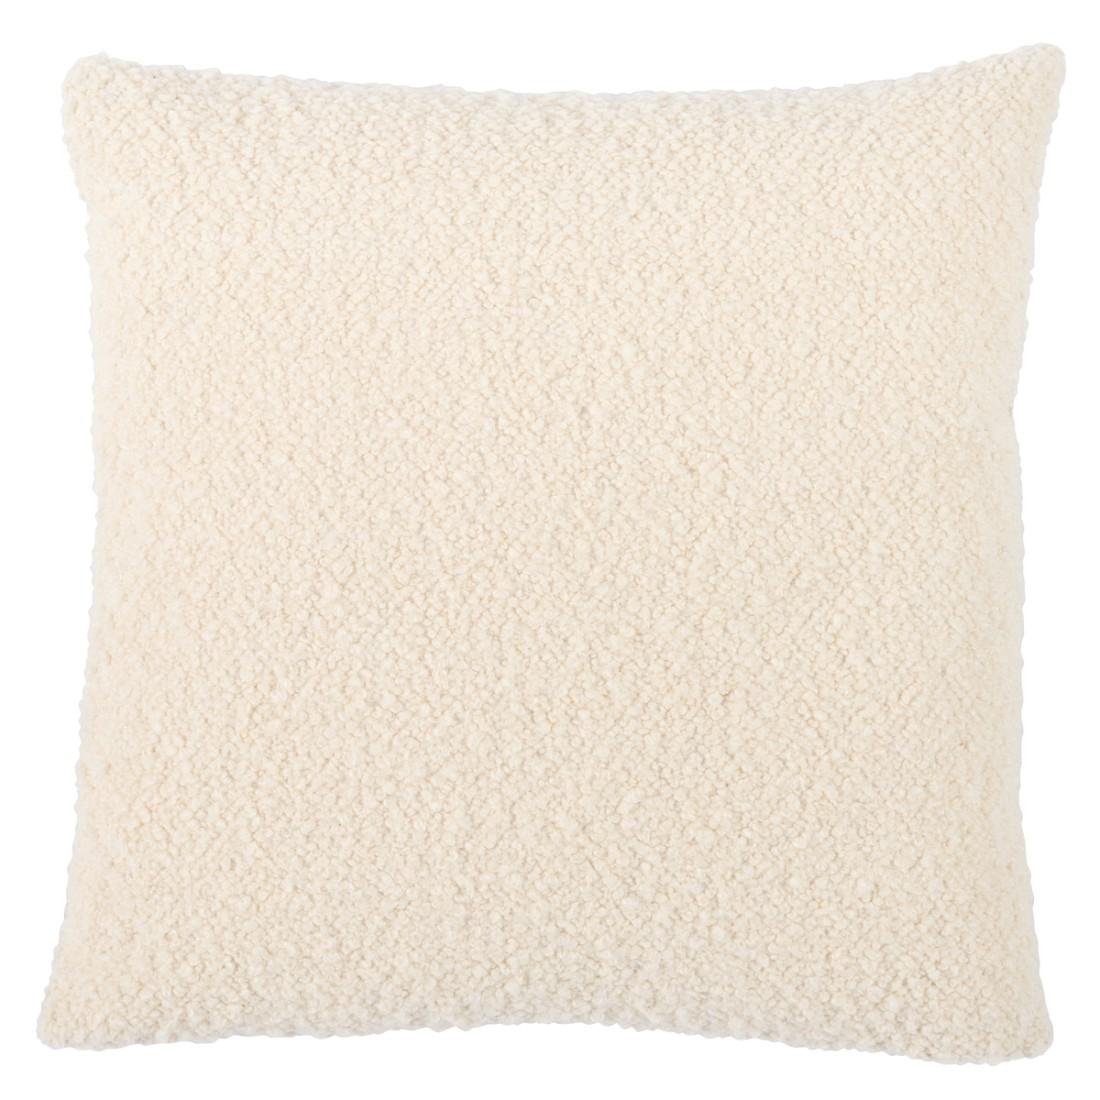 This pillow features Durant Embroidery with a knife edge finish. This medium-scale geometric patterns cool, textural contrast is created with a nubbly bouclé yarn that’s drawn across a linen ground and affixed with an invisible couching stitch. Back